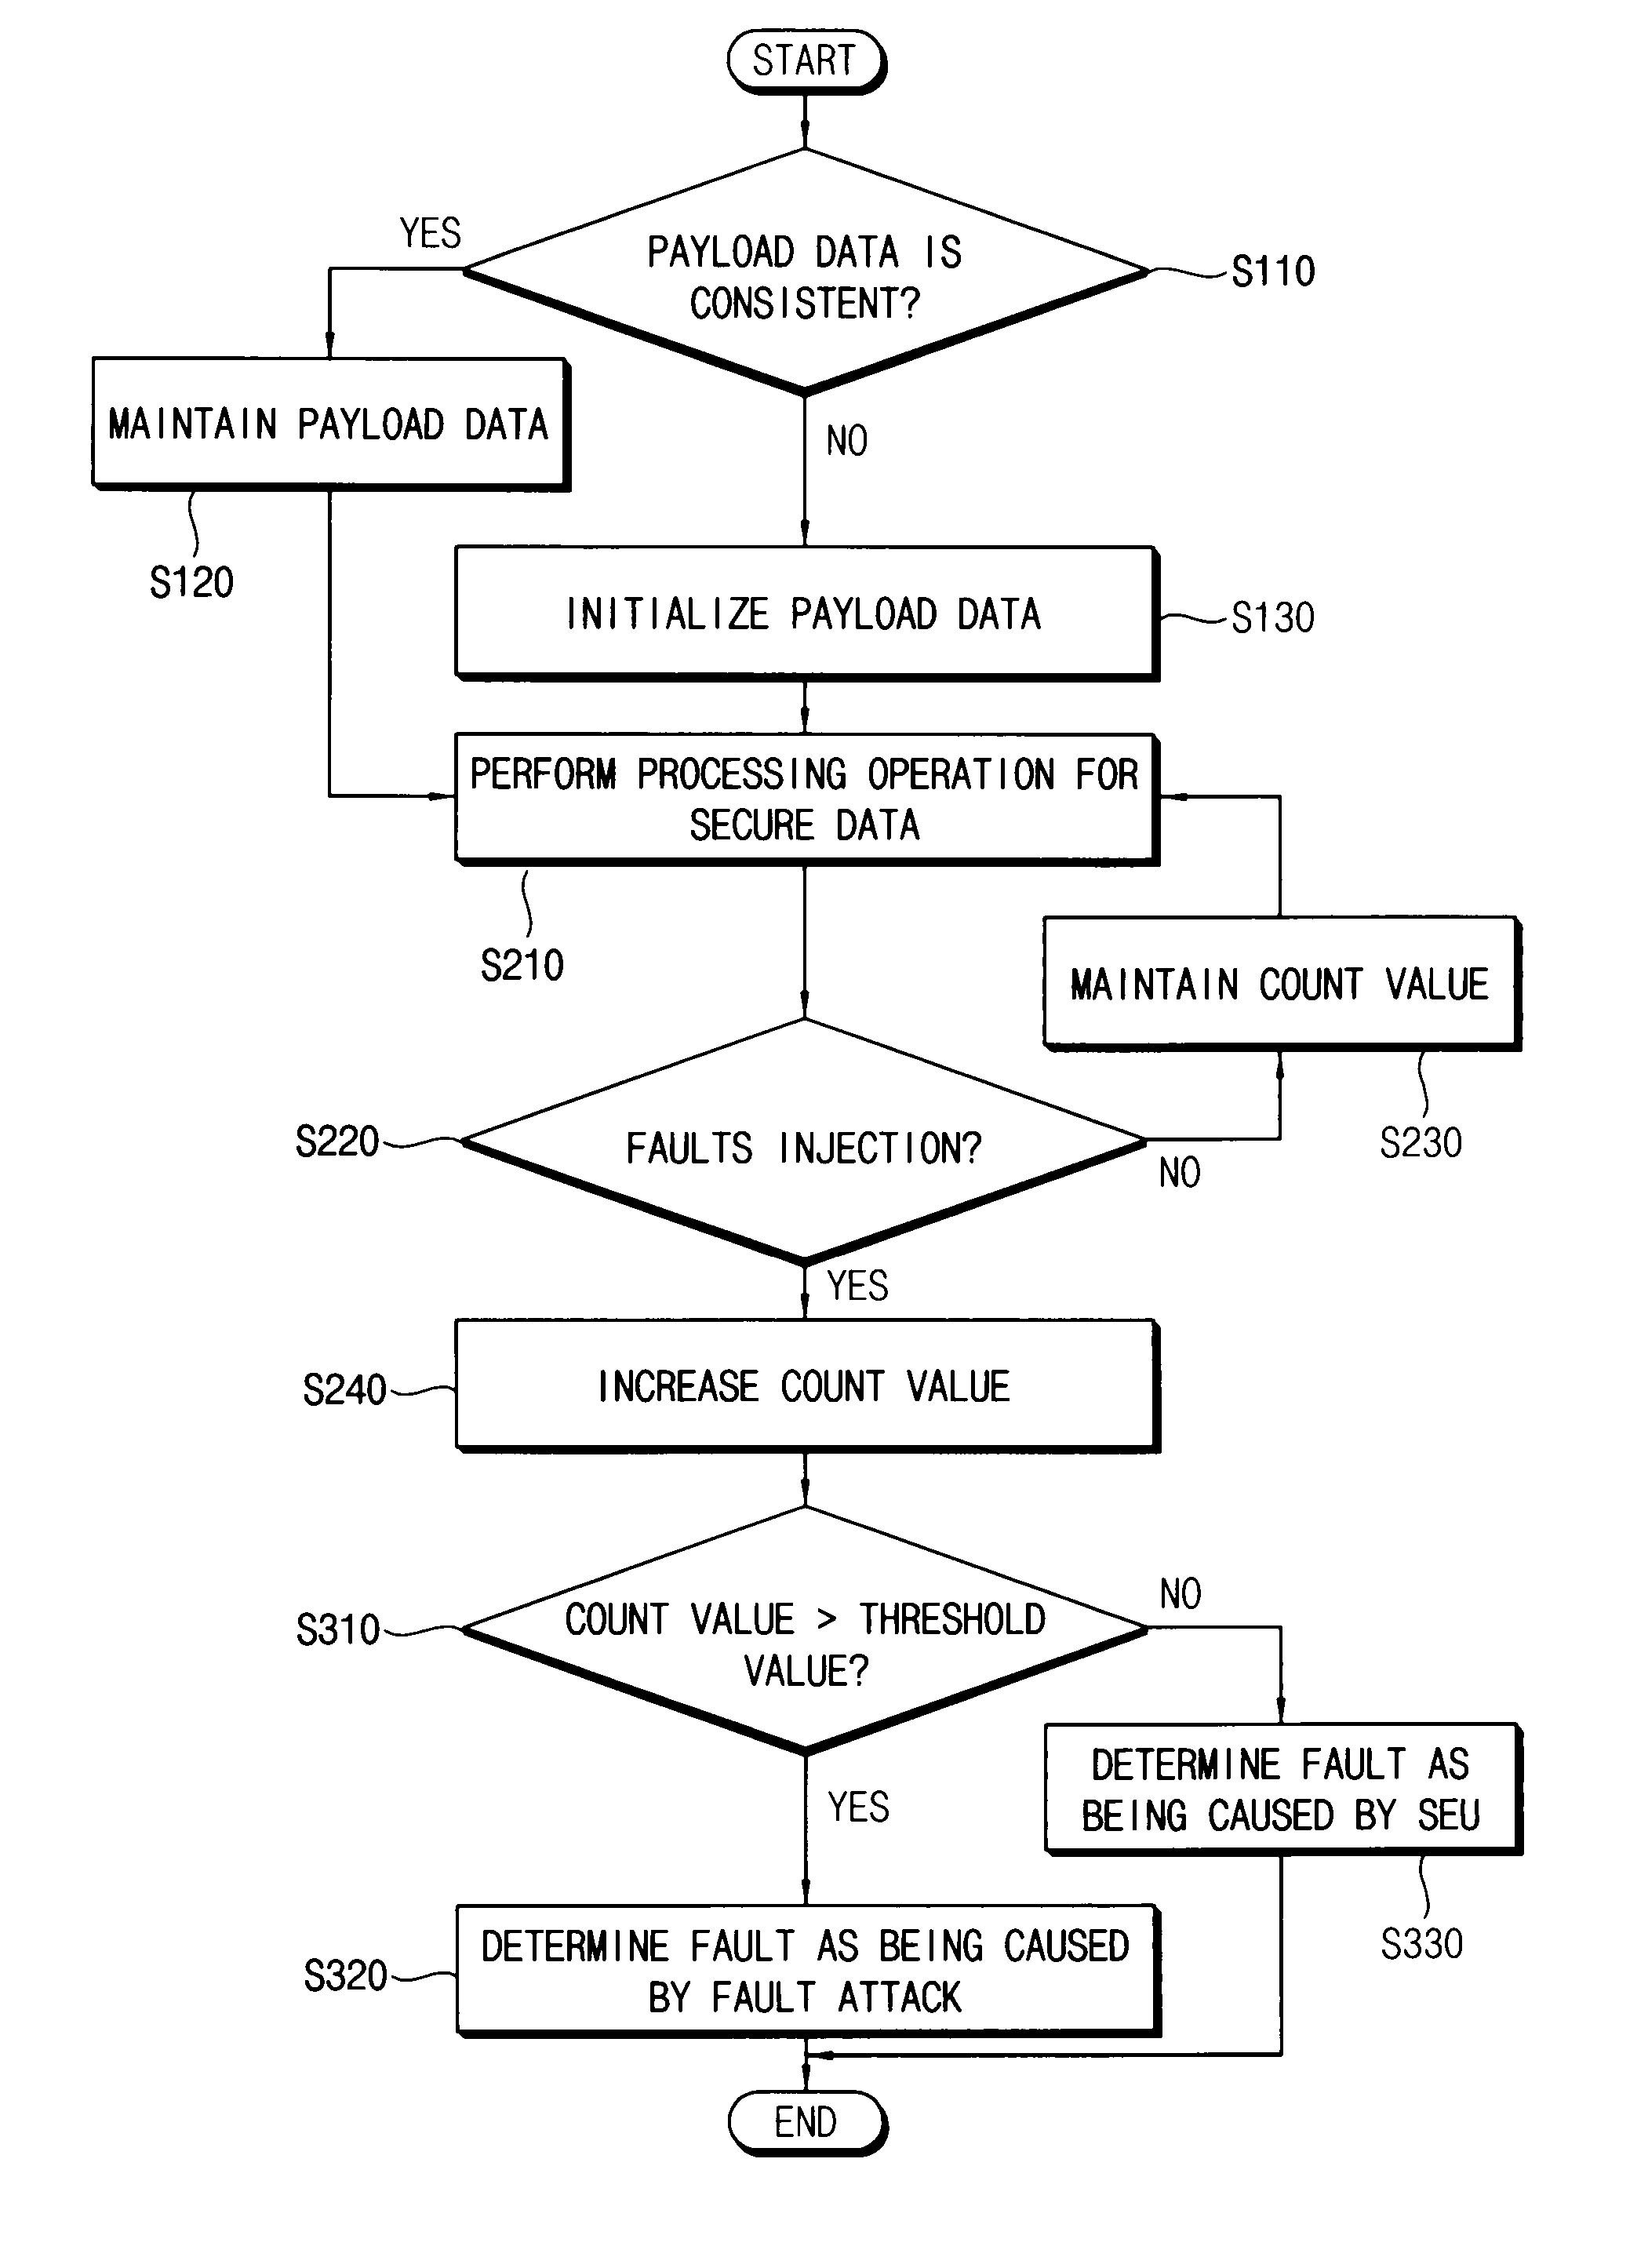 Method of detecting fault attack